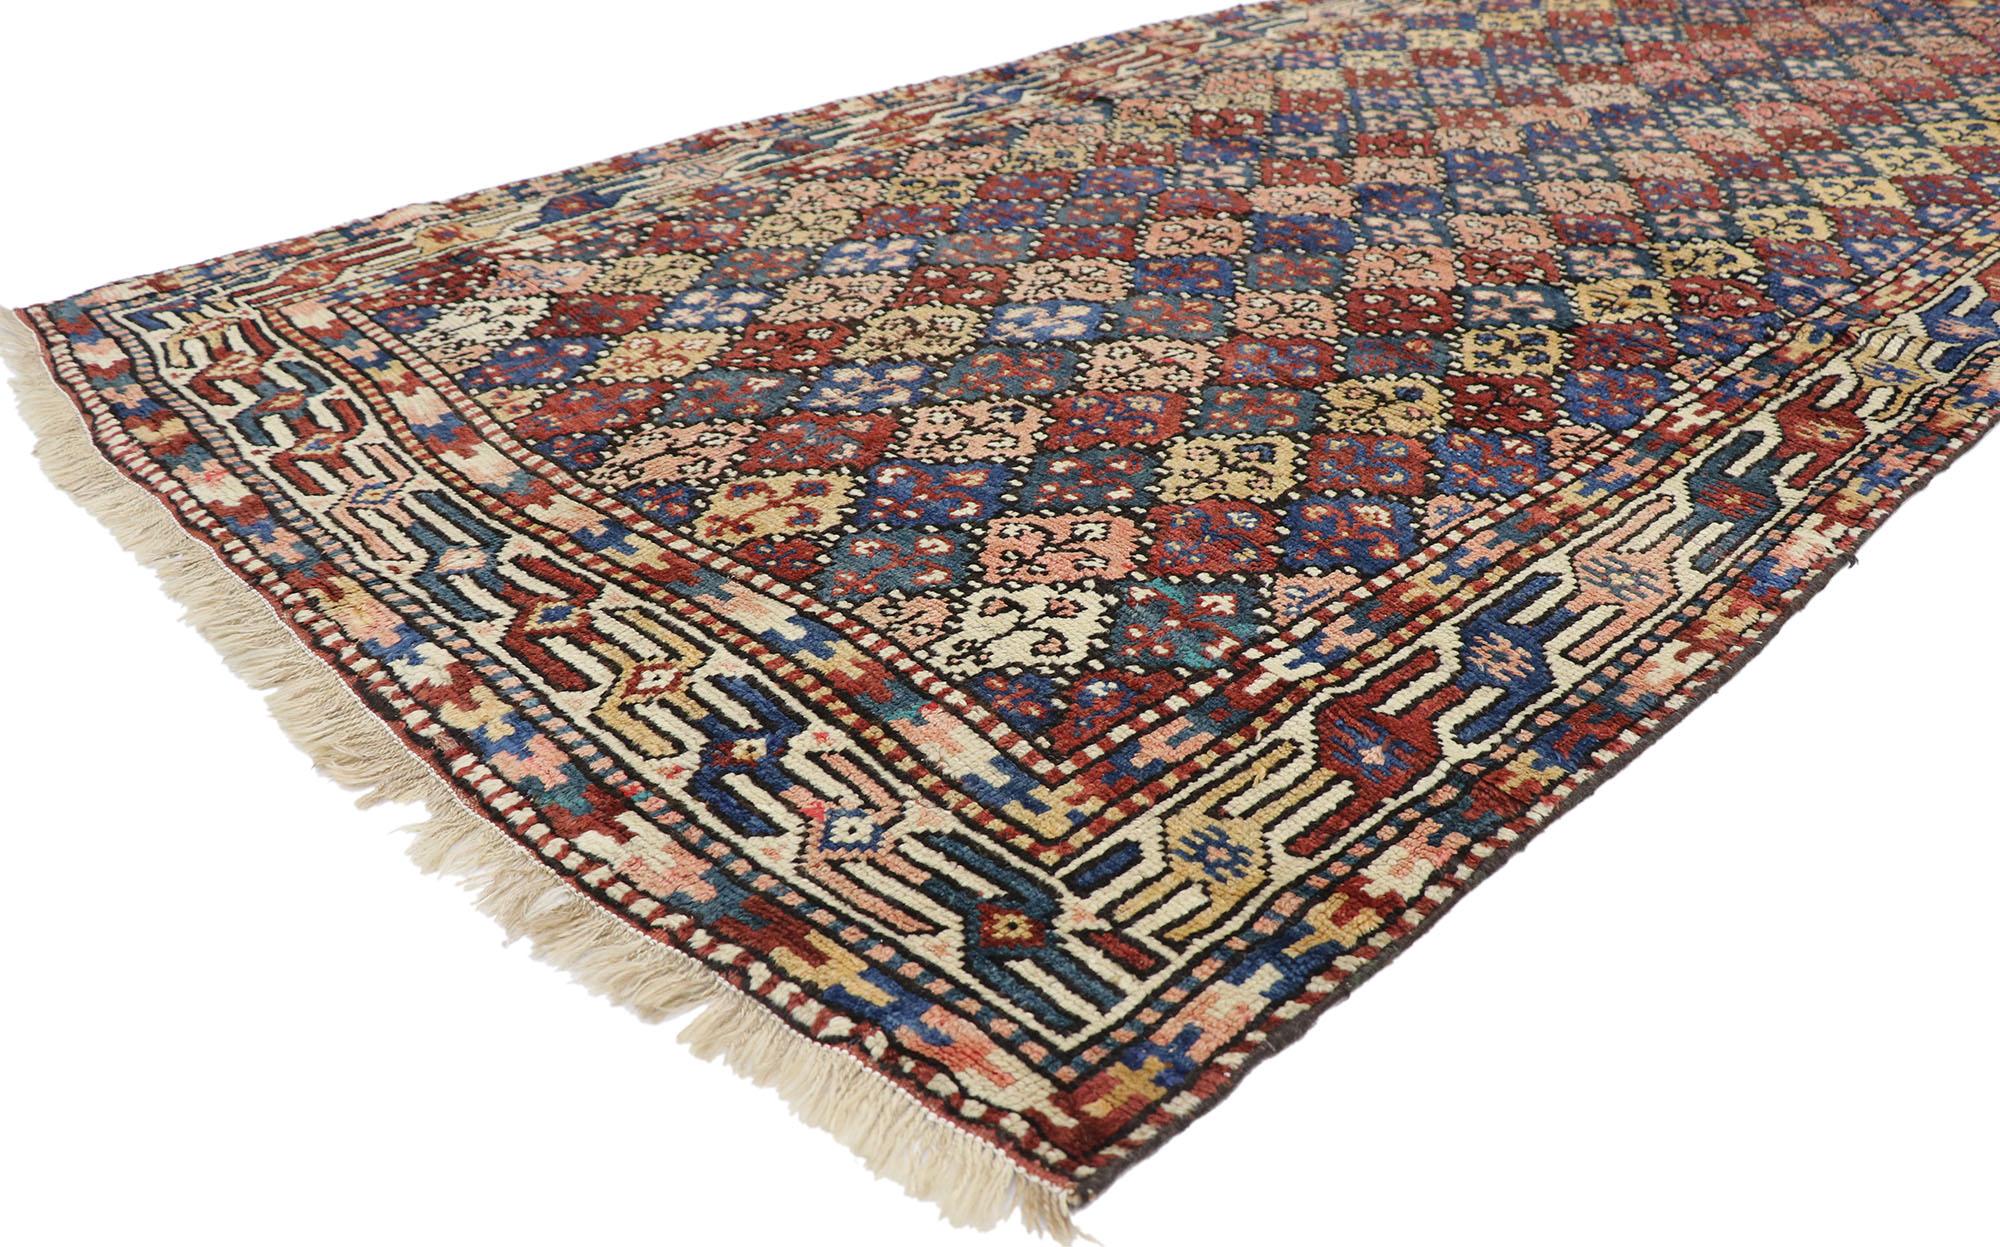 60893 Antique Azerbaijan rug with Mid-Century Modern tribal style 04'05 x 09'09. With its warm hues and rugged beauty, this hand-knotted wool antique Azerbaijan rug beautifully embodies a Mid-Century Modern tribal style. The abrashed field features